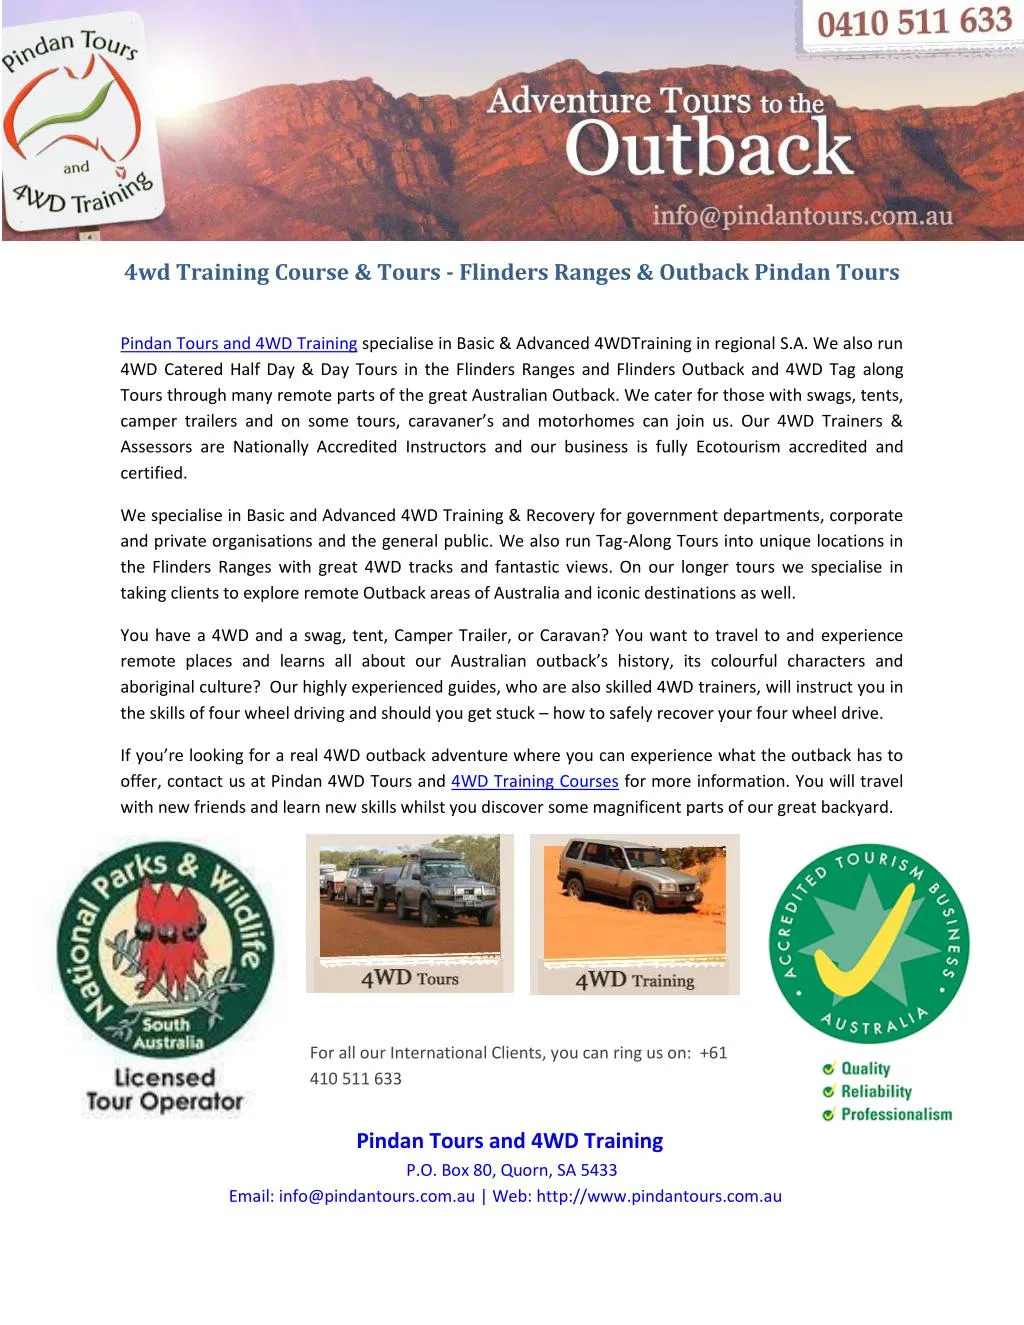 4wd training course tours flinders ranges outback